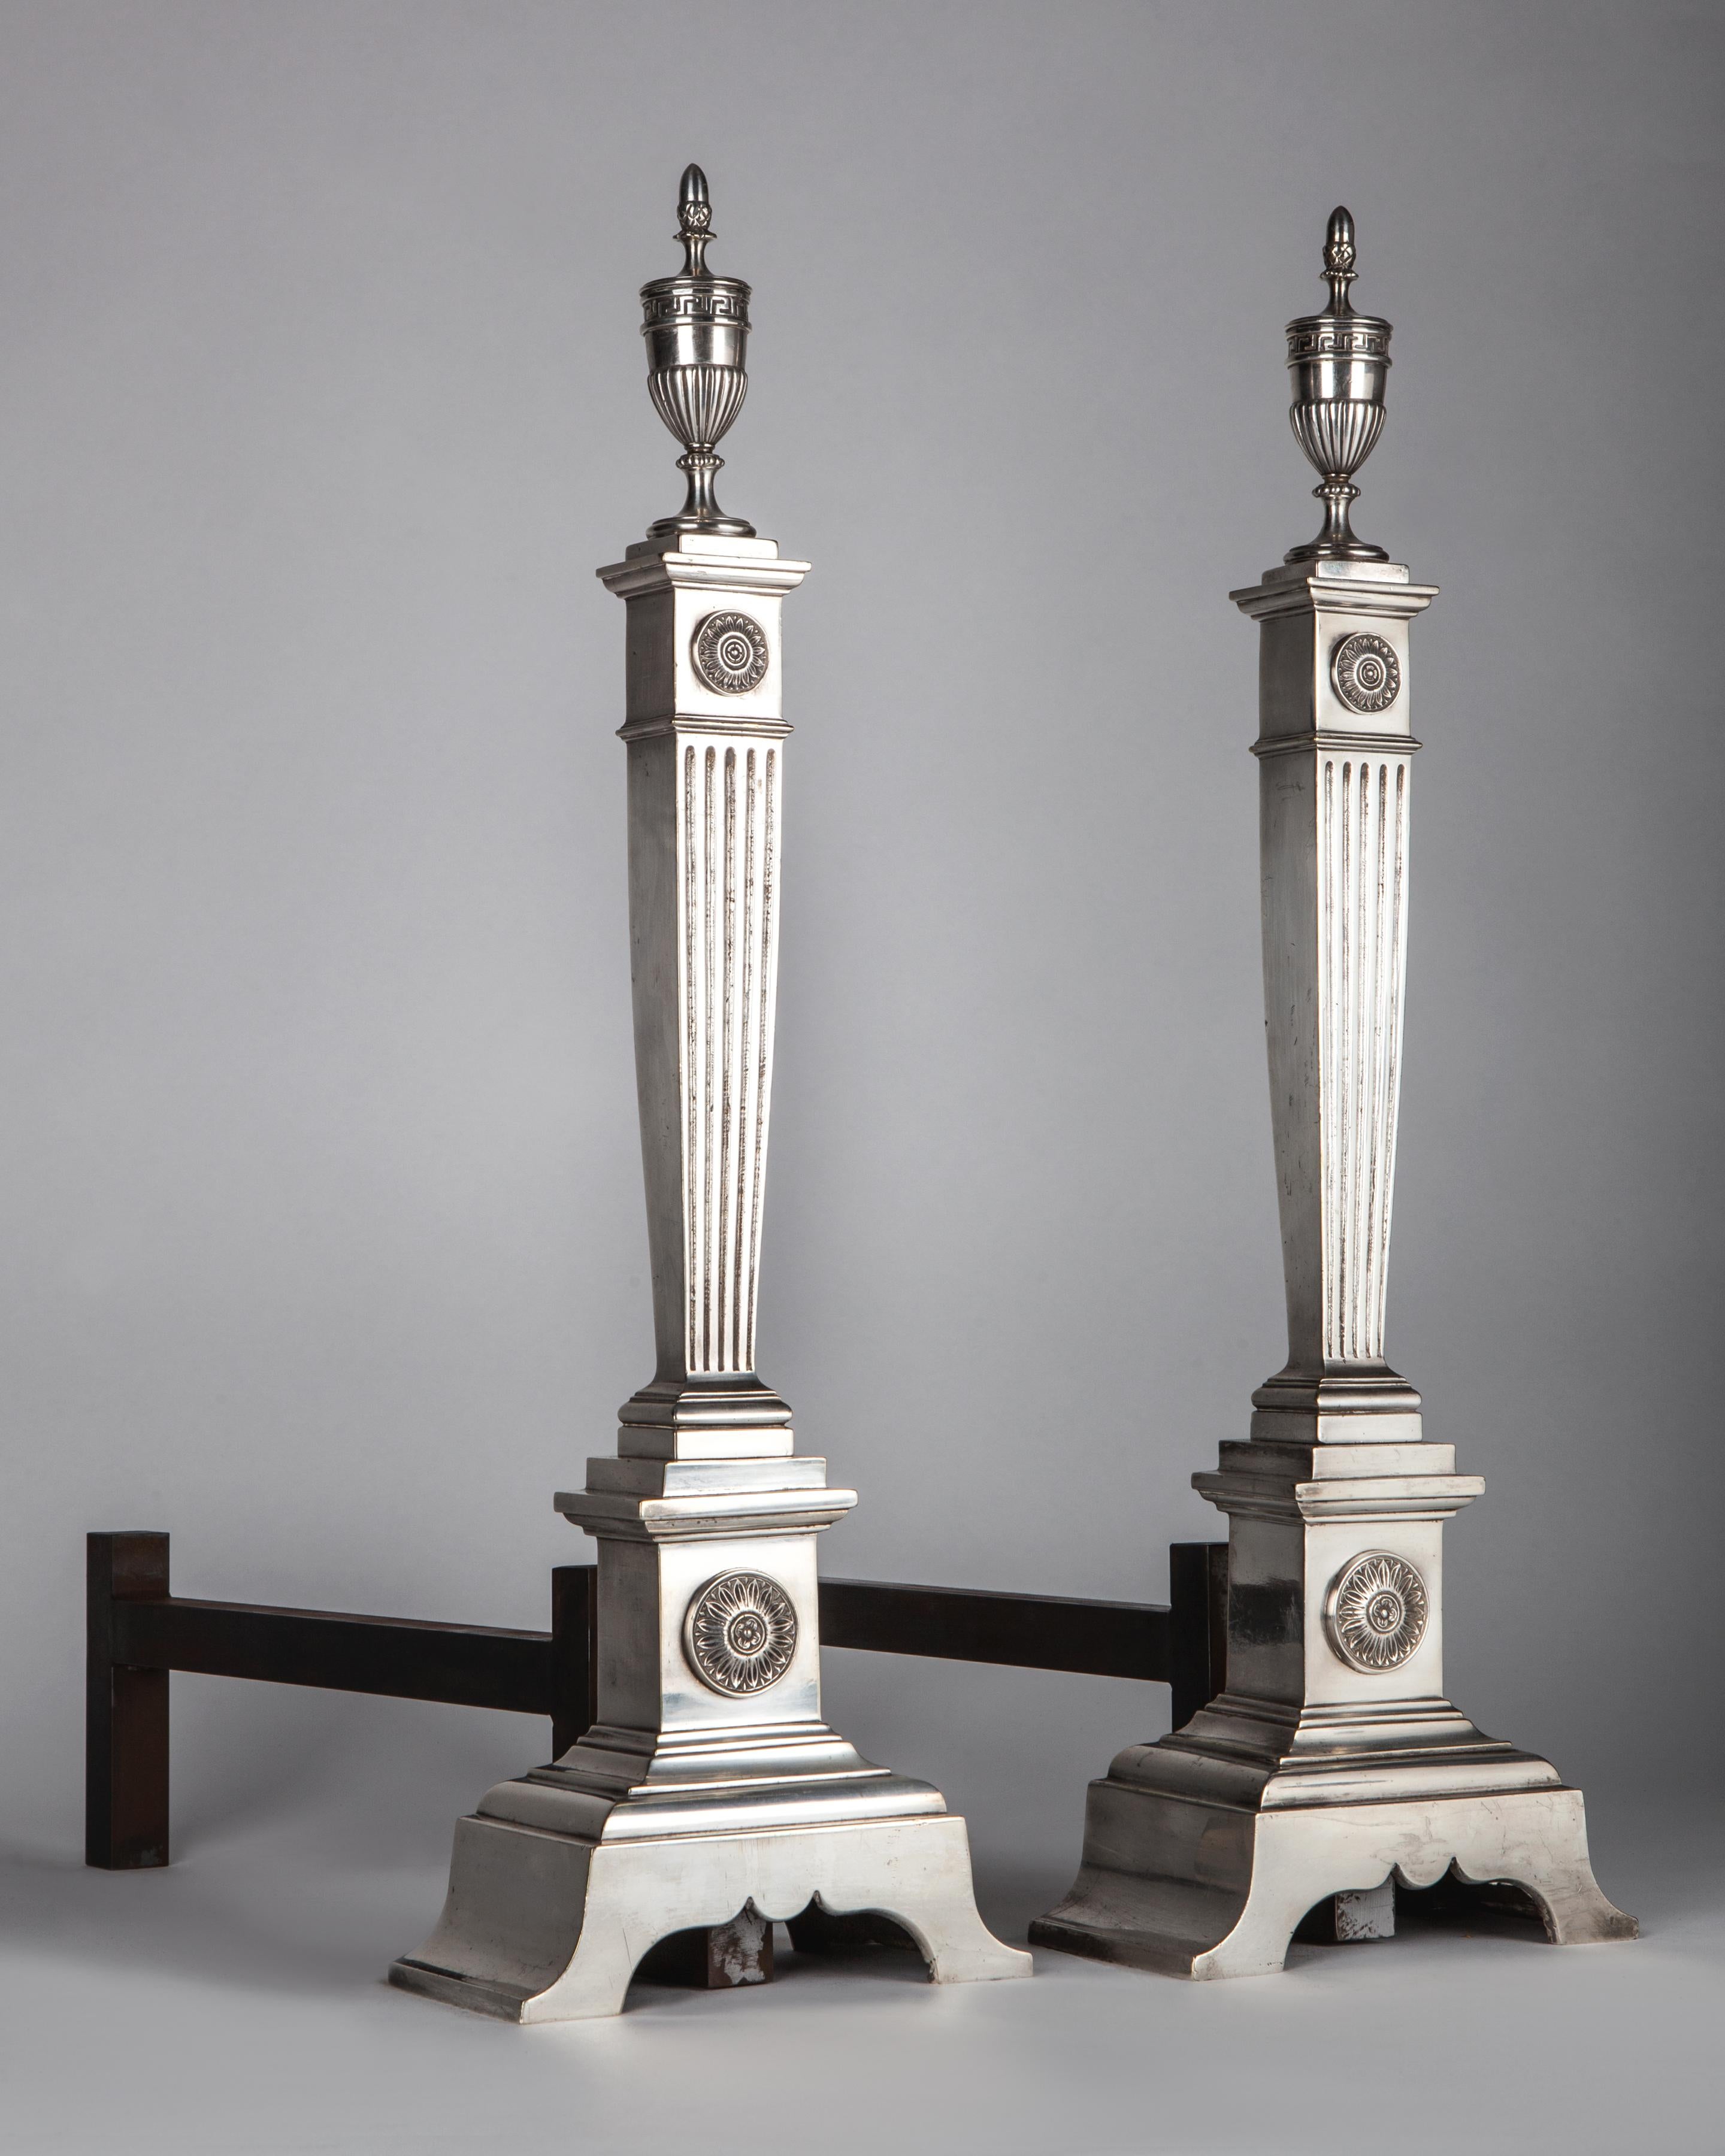 AFP0602
A pair of antique silver plate andirons with tapered square fluted column bodies on splayed bases surmounted by urn finials, circa 1910s.

Dimensions:
Overall 23-3/4